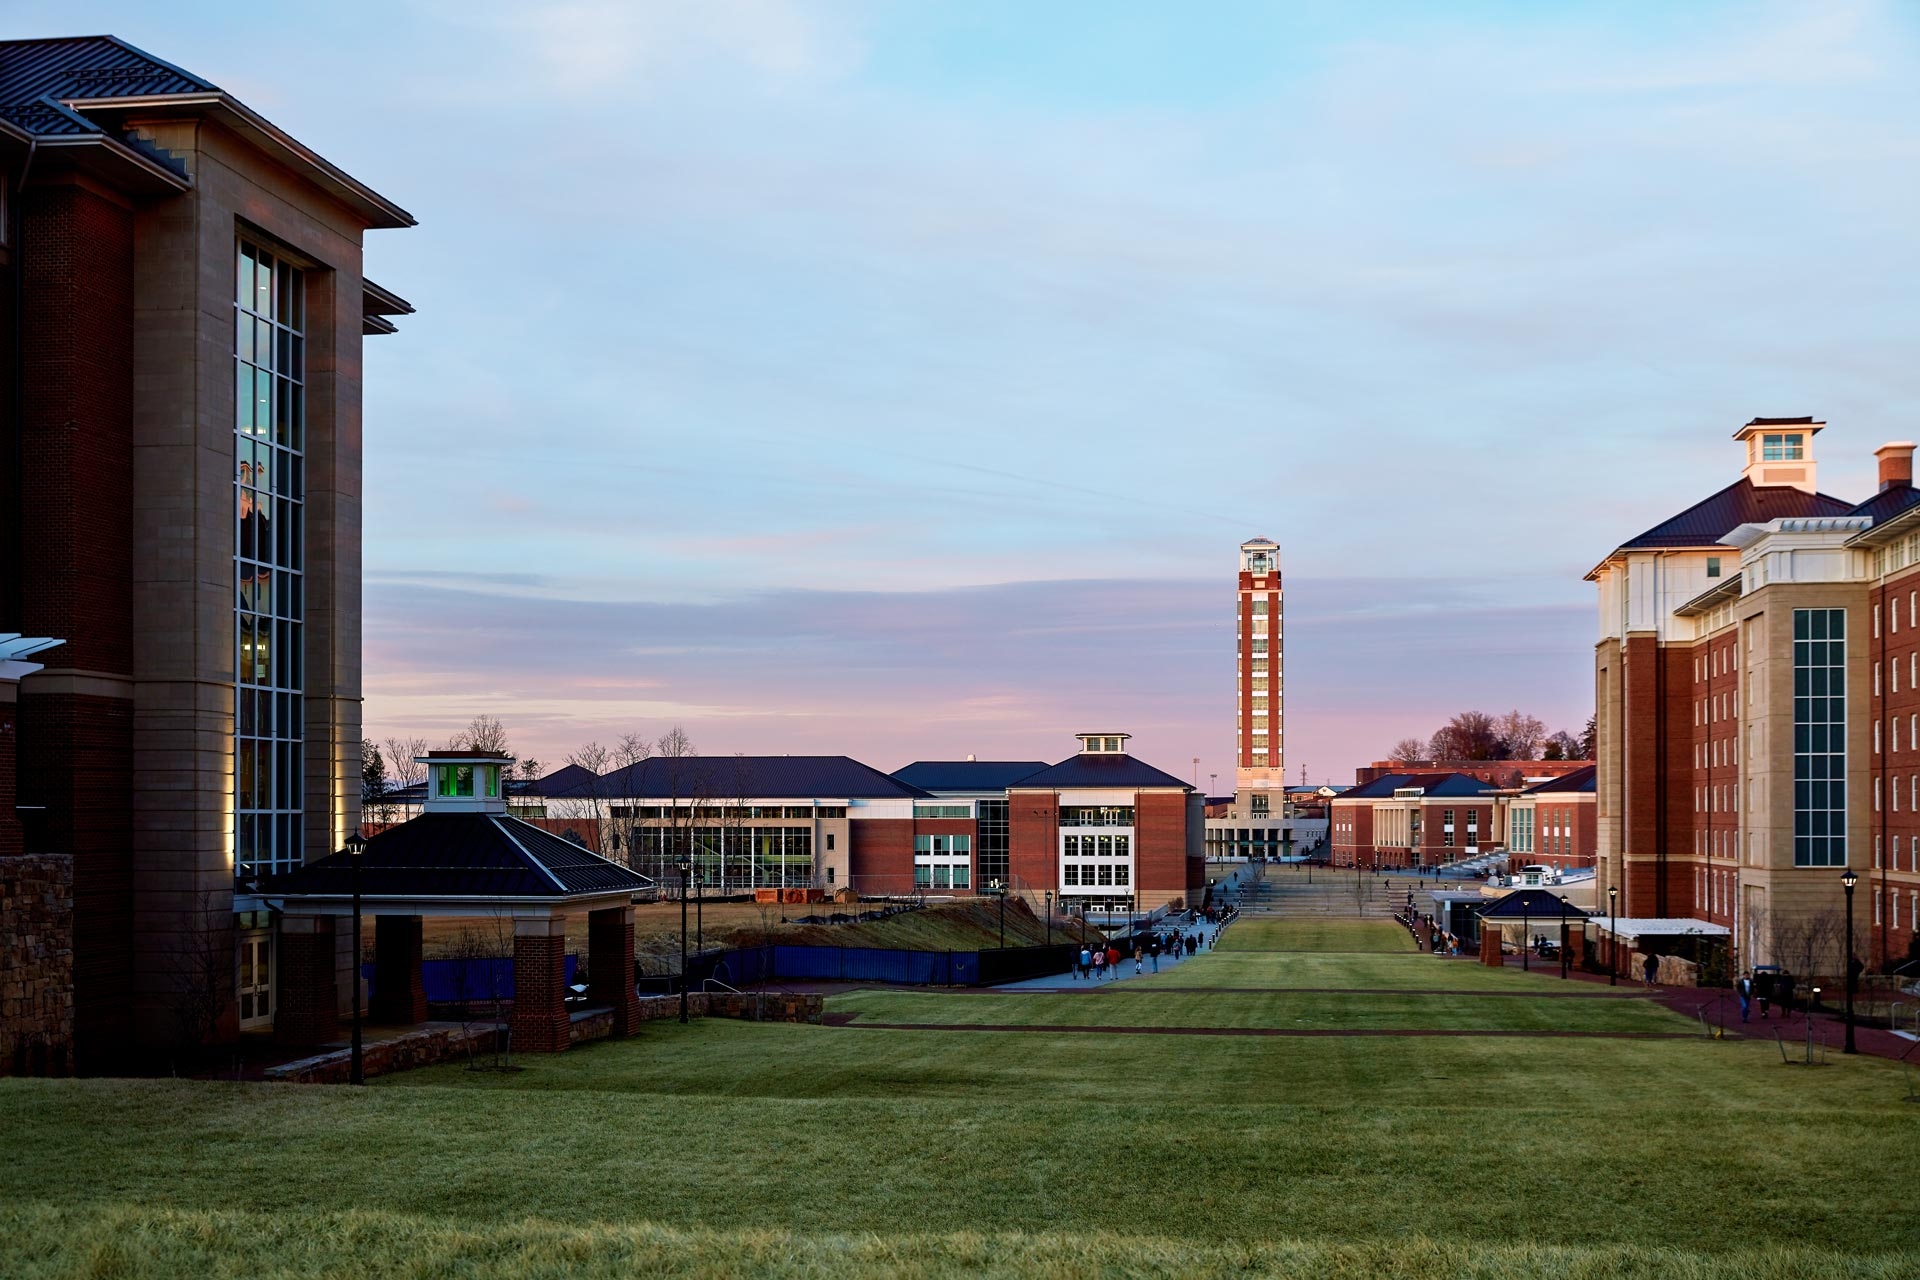 Liberty University’s John J. Rawlings School of Theology is the Largest Seminary in America Today